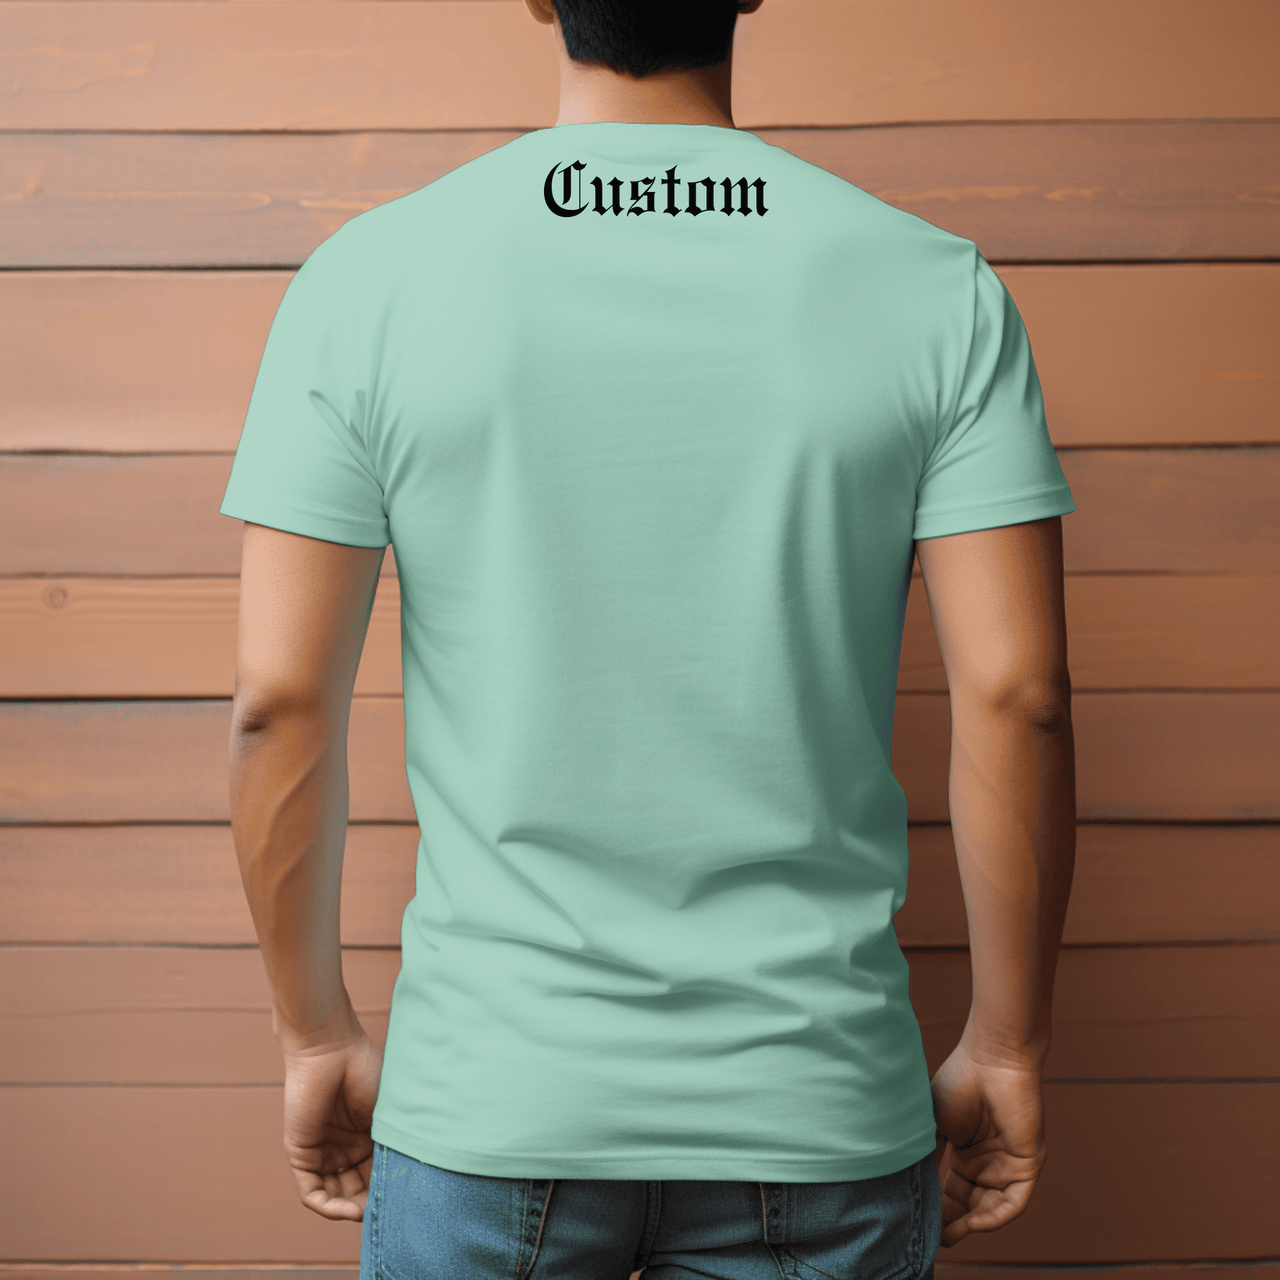 Personalized Custom T Shirt Hight Quality Perfect Gift For Holiday Christmas Wedding Special Day